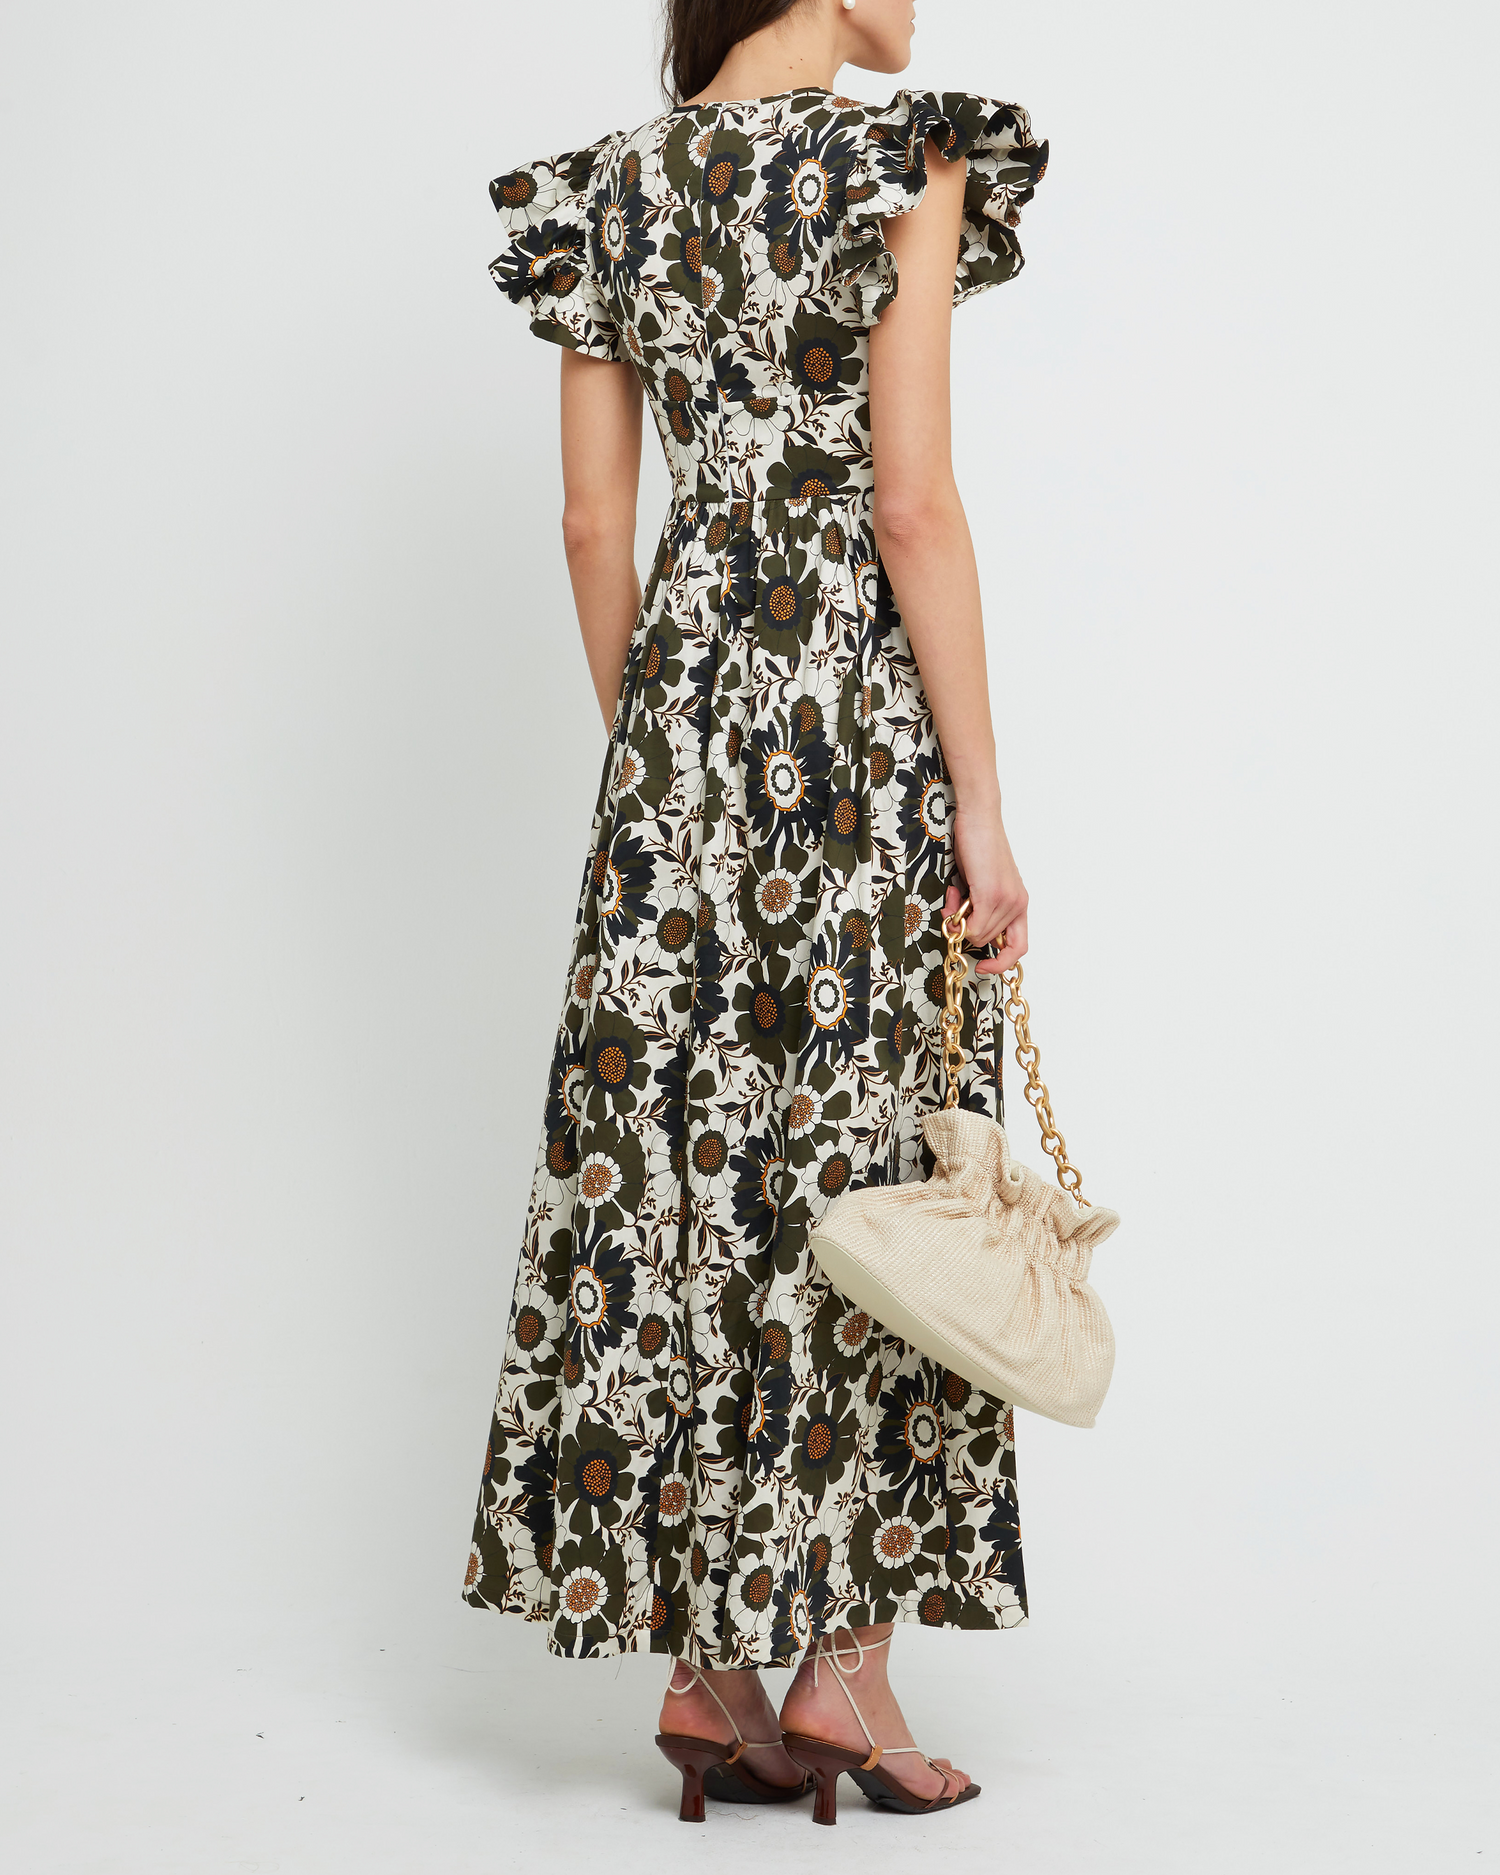 Second image of Martinelli Dress, a white maxi dress, ruffle cap sleeves, pockets, floral print, bold, high neck